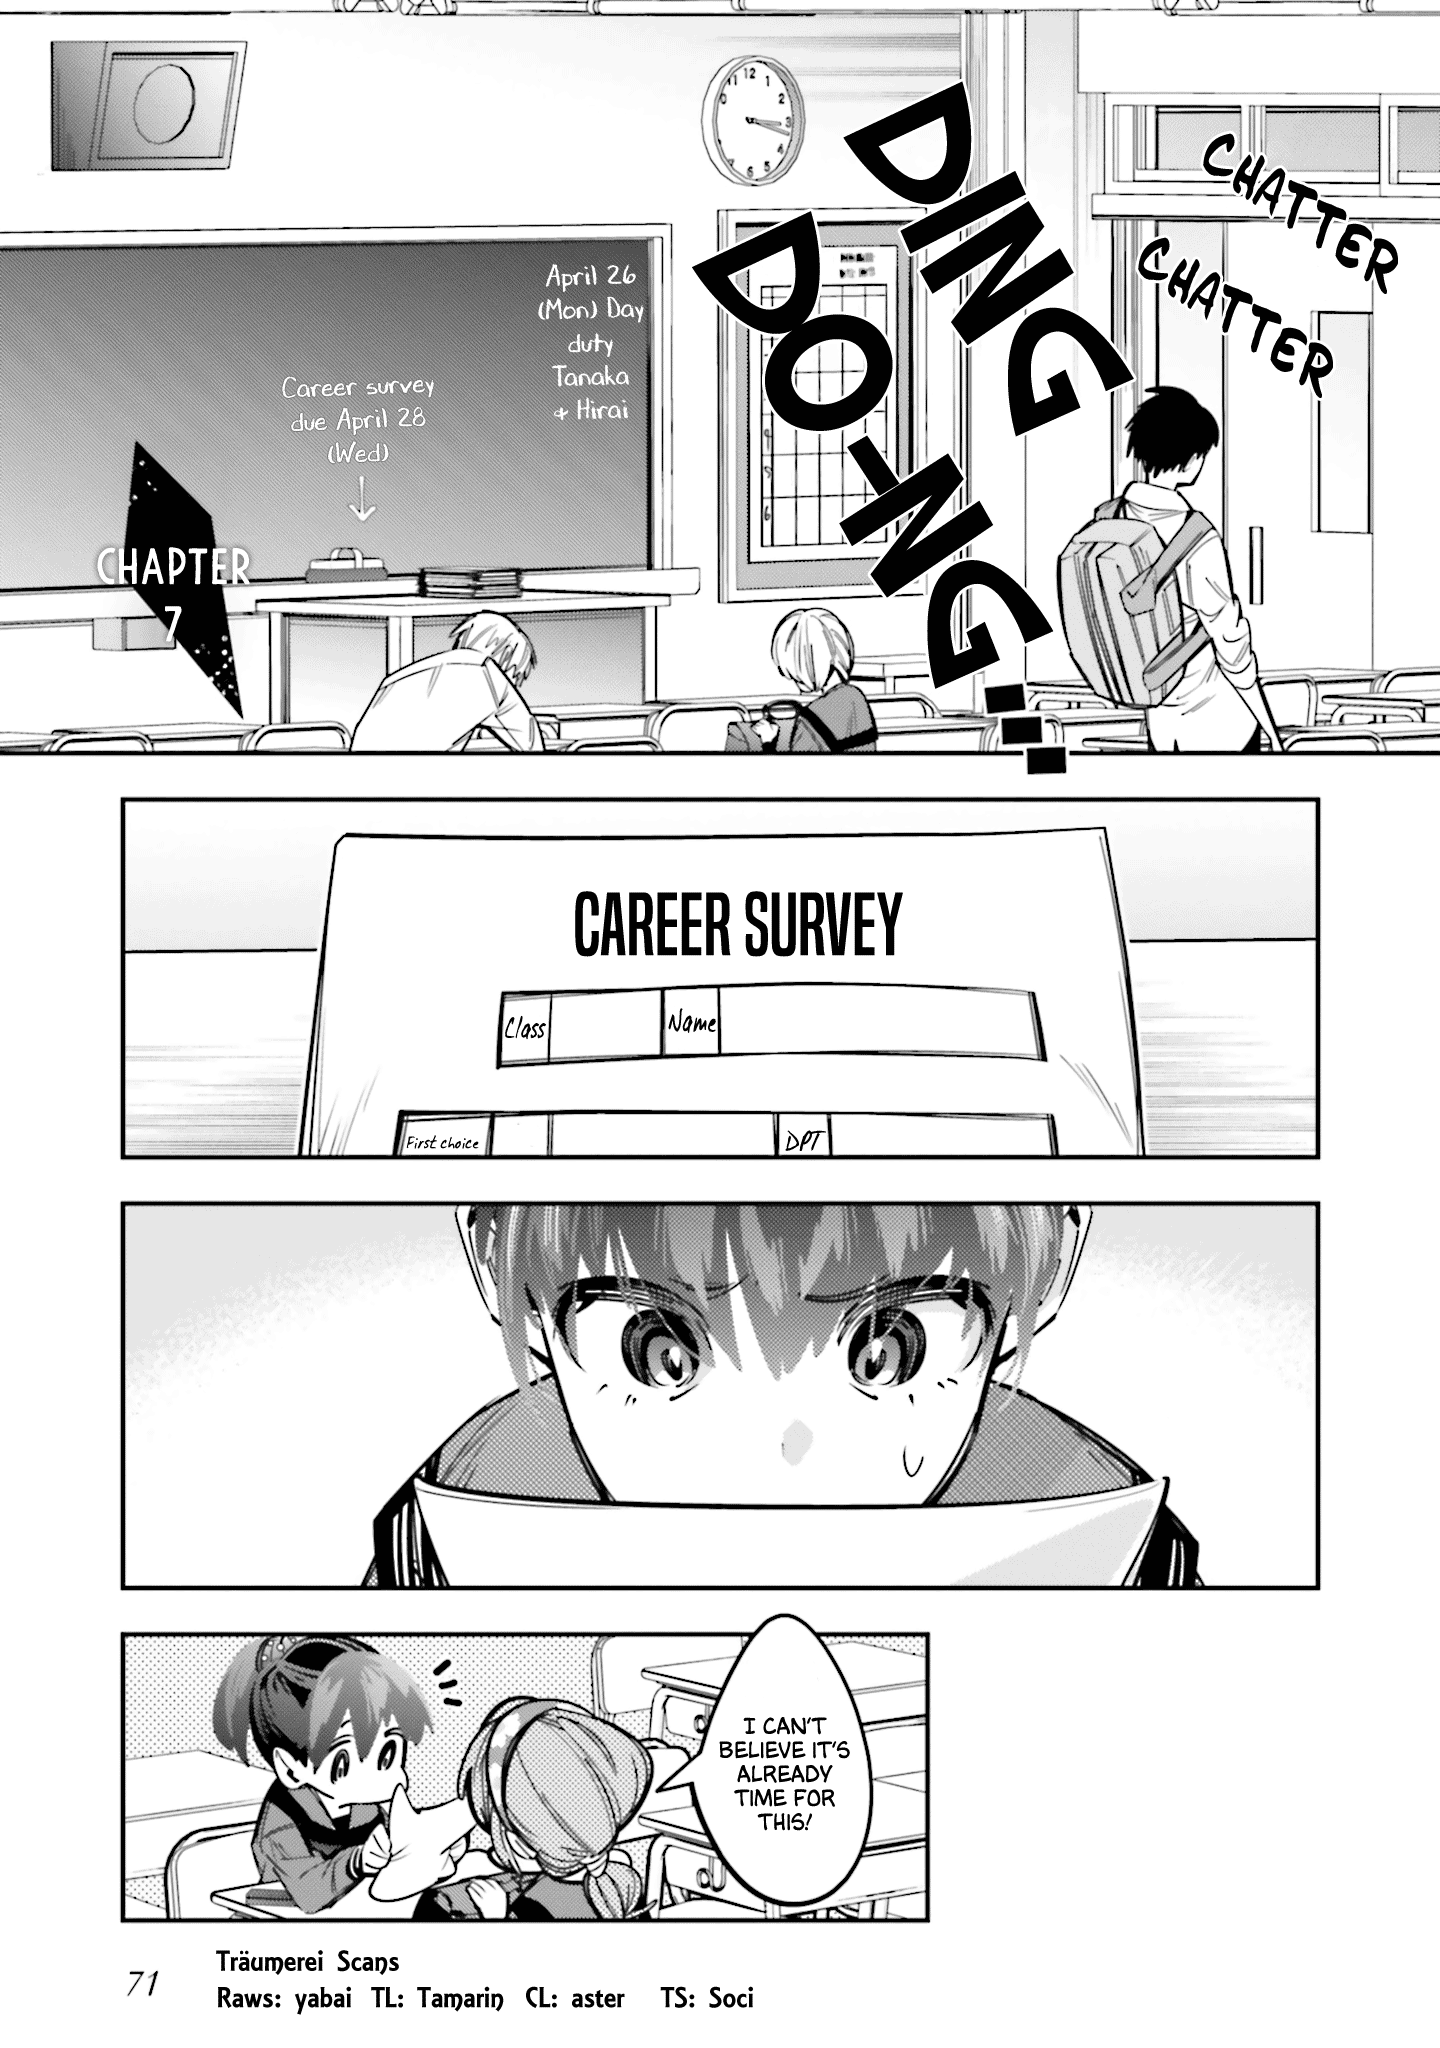 I Reincarnated As The Little Sister Of A Death Game Manga's Murder Mastermind And Failed Chapter 7 #1